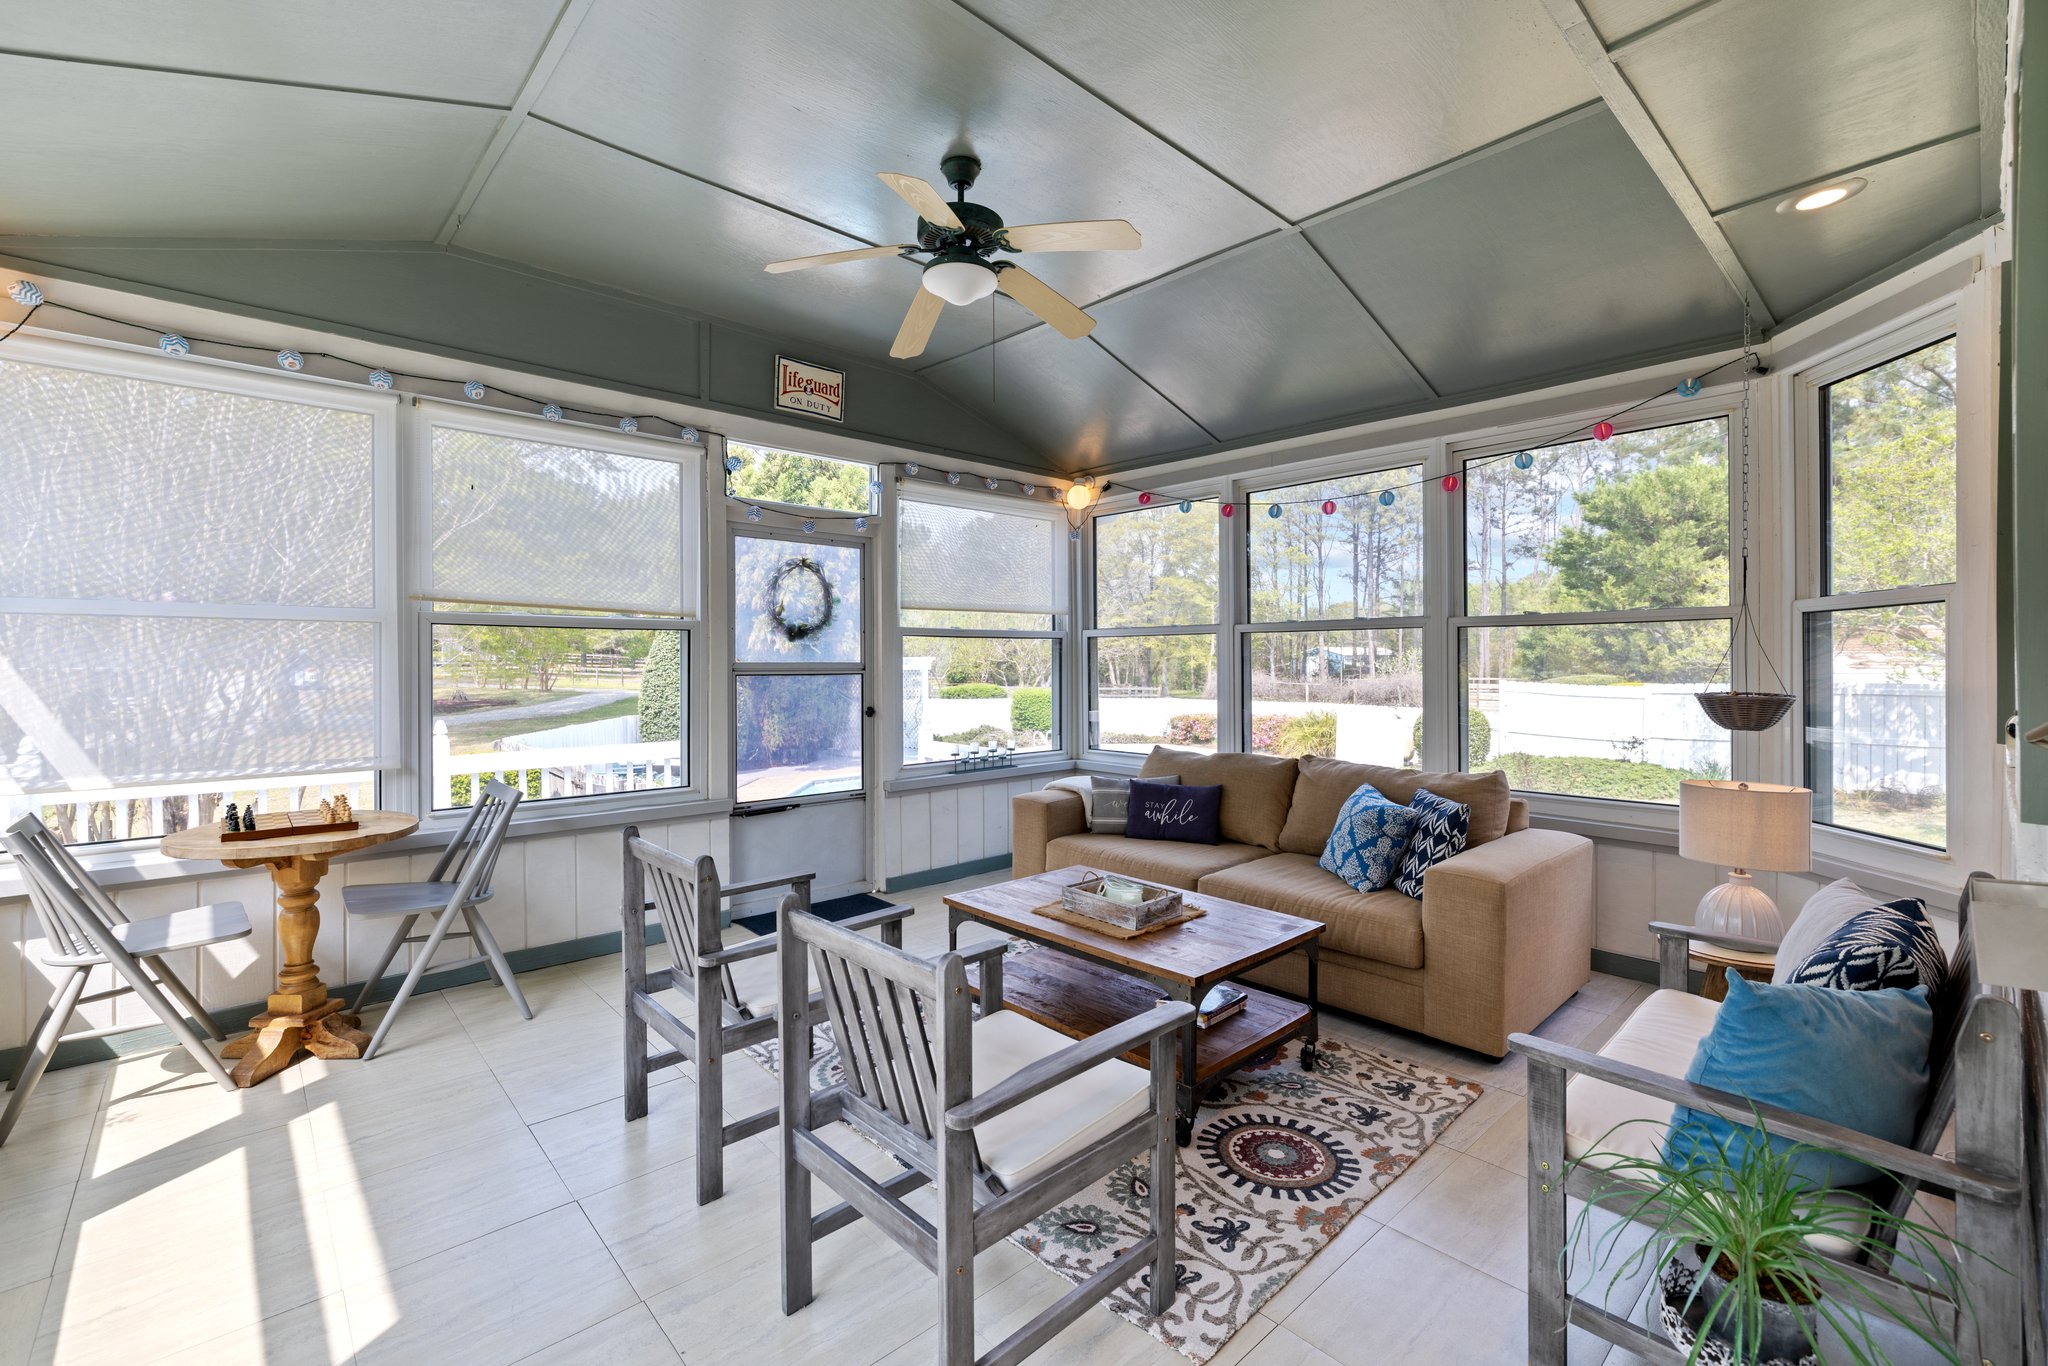 Just off the kitchen you will find this sunroom with access to the pool and backyard.